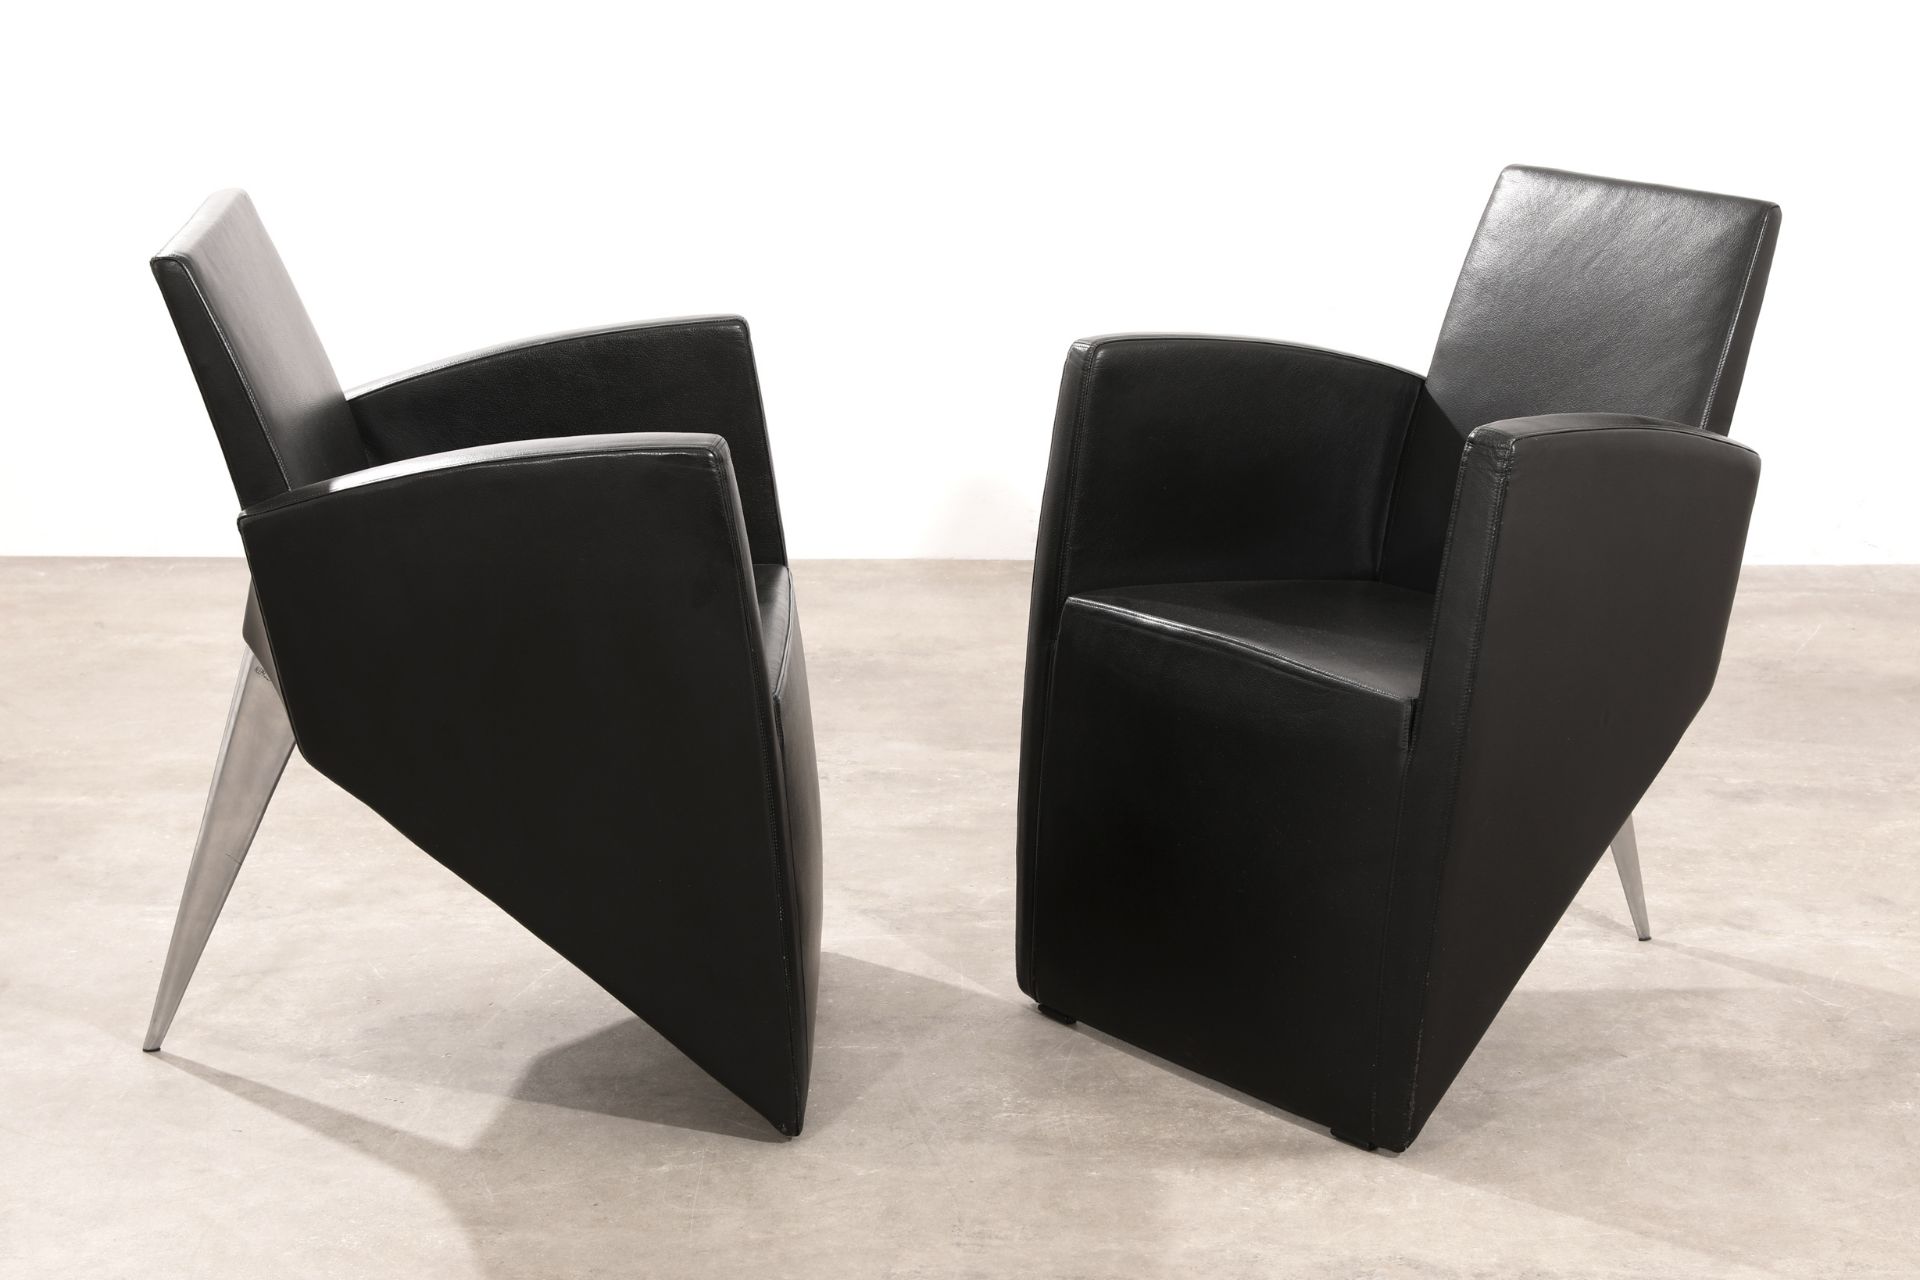 Philippe Starck, Aleph, 2 Chairs, model J. Lang